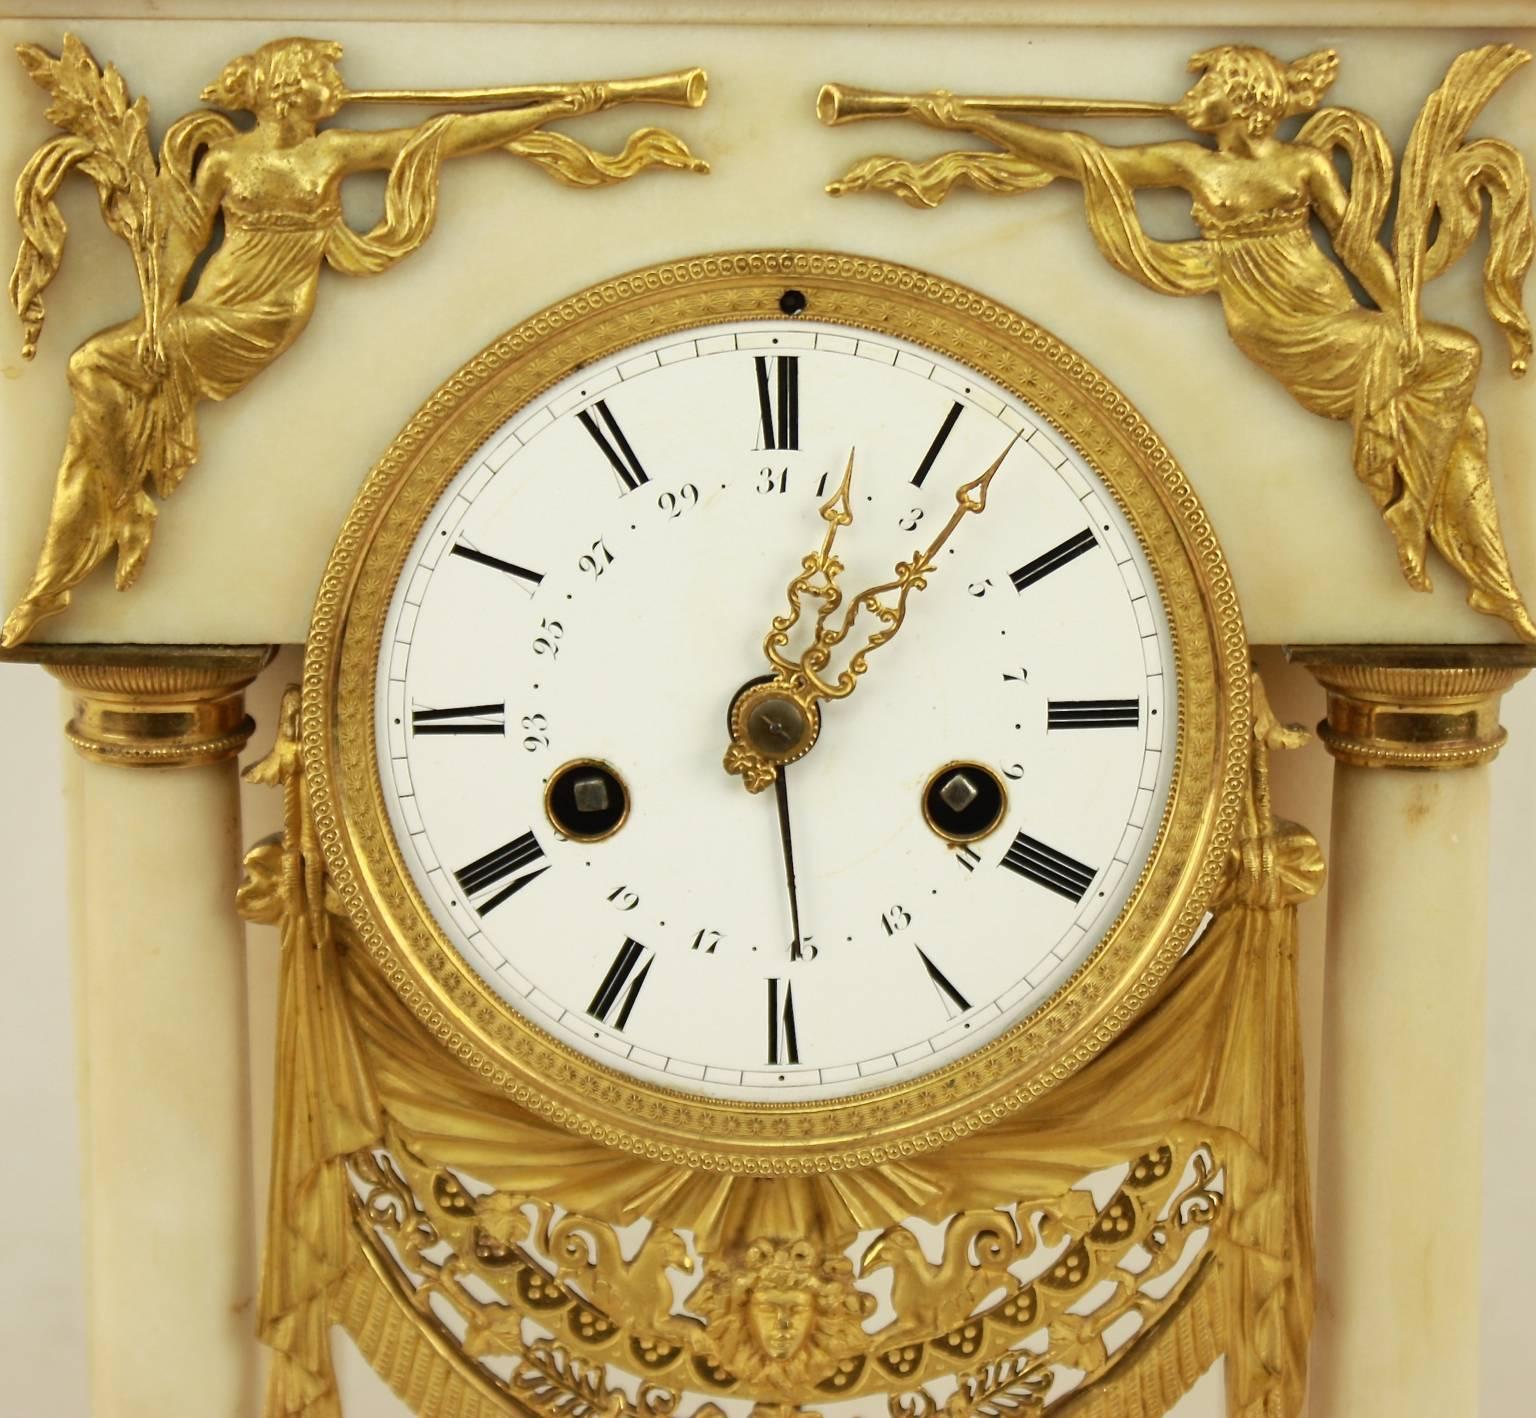 A French Empire alabaster portico clock with finely chased ormolu mounts. The white enamel dial with Roman numerals and pierced gilt hands, contained within a delicately chased and pierced drapery (presenting the central bust of Appollon) framed